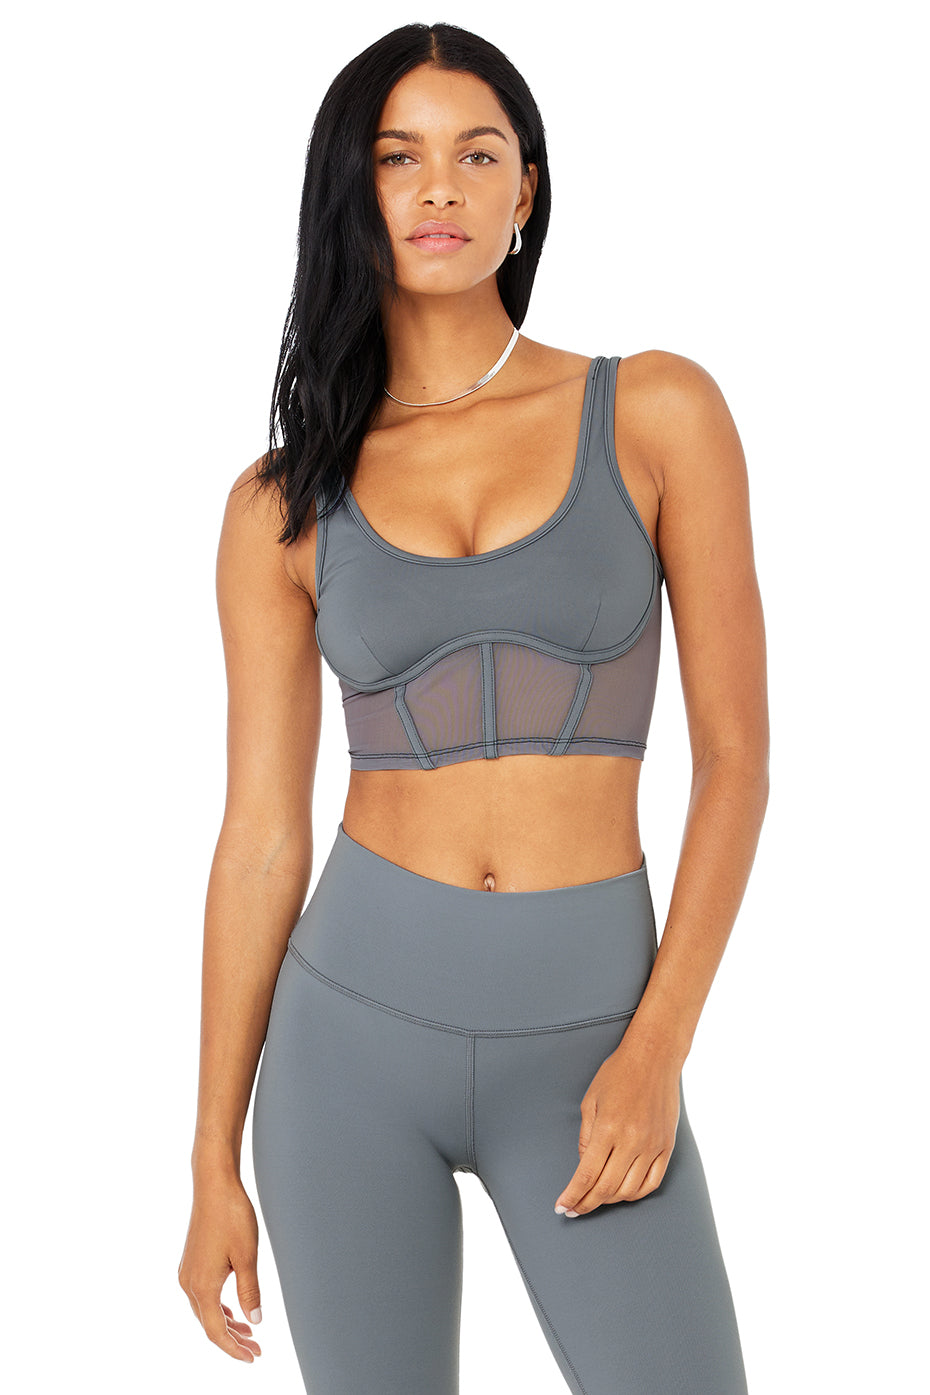 Airbrush Mesh Corset Tank Top in Steel Blue by Alo Yoga - Work Well Daily